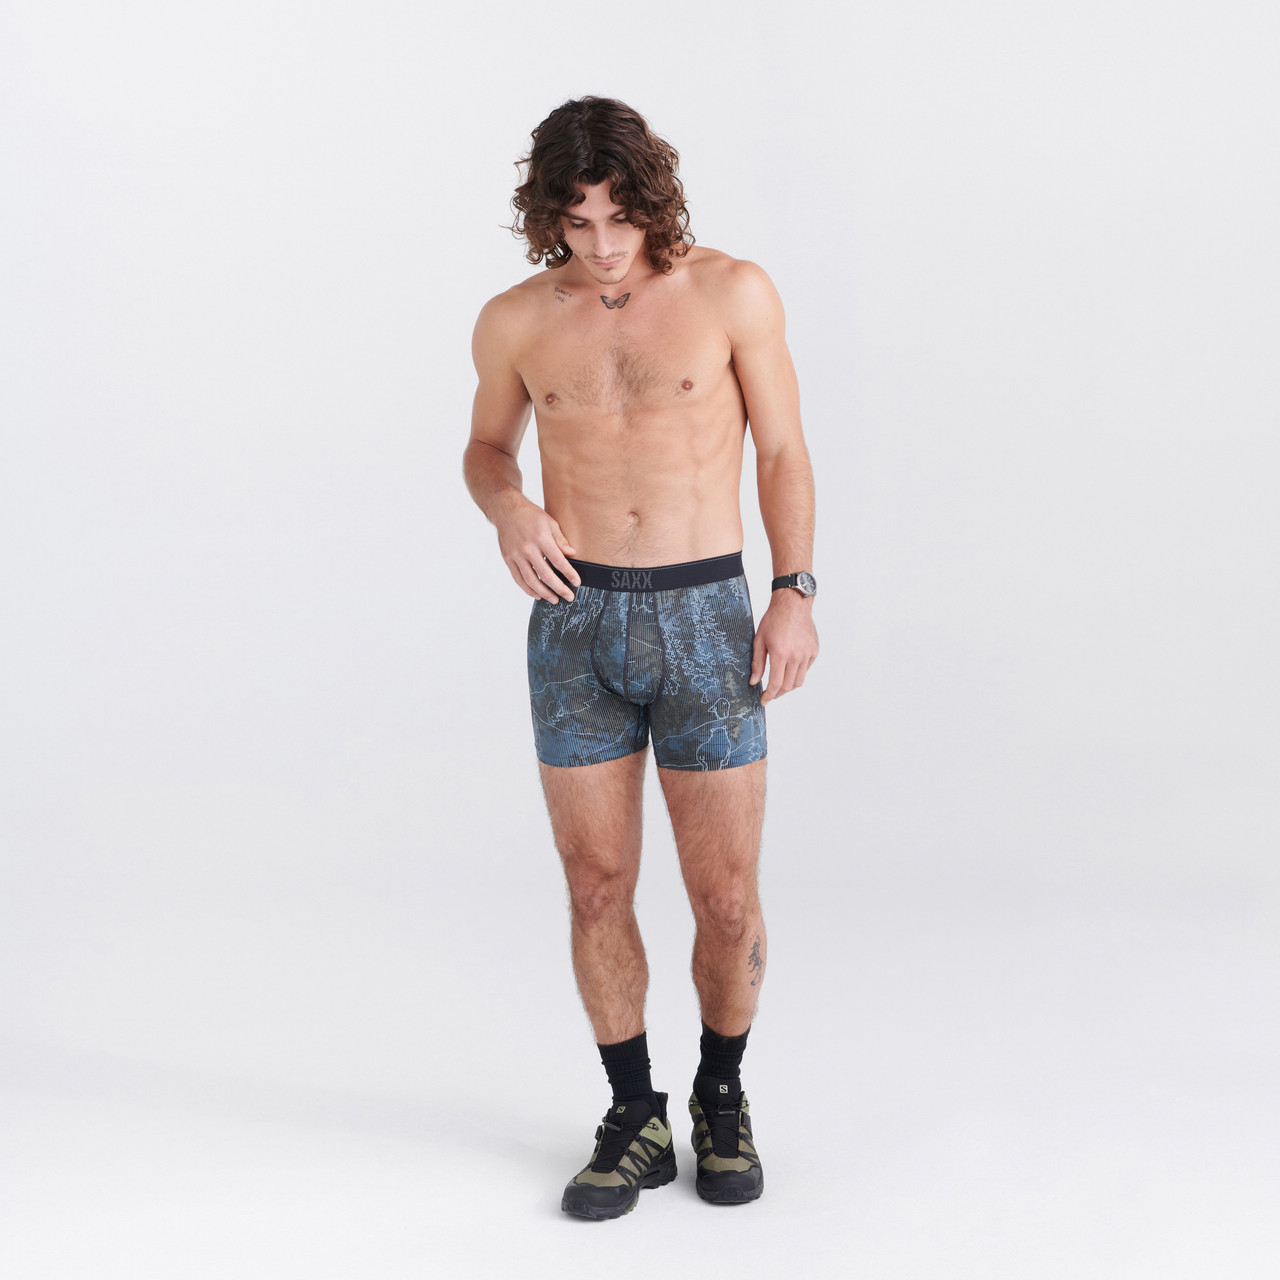 M's Quest Quick Dry Mesh Boxer Brief Fly